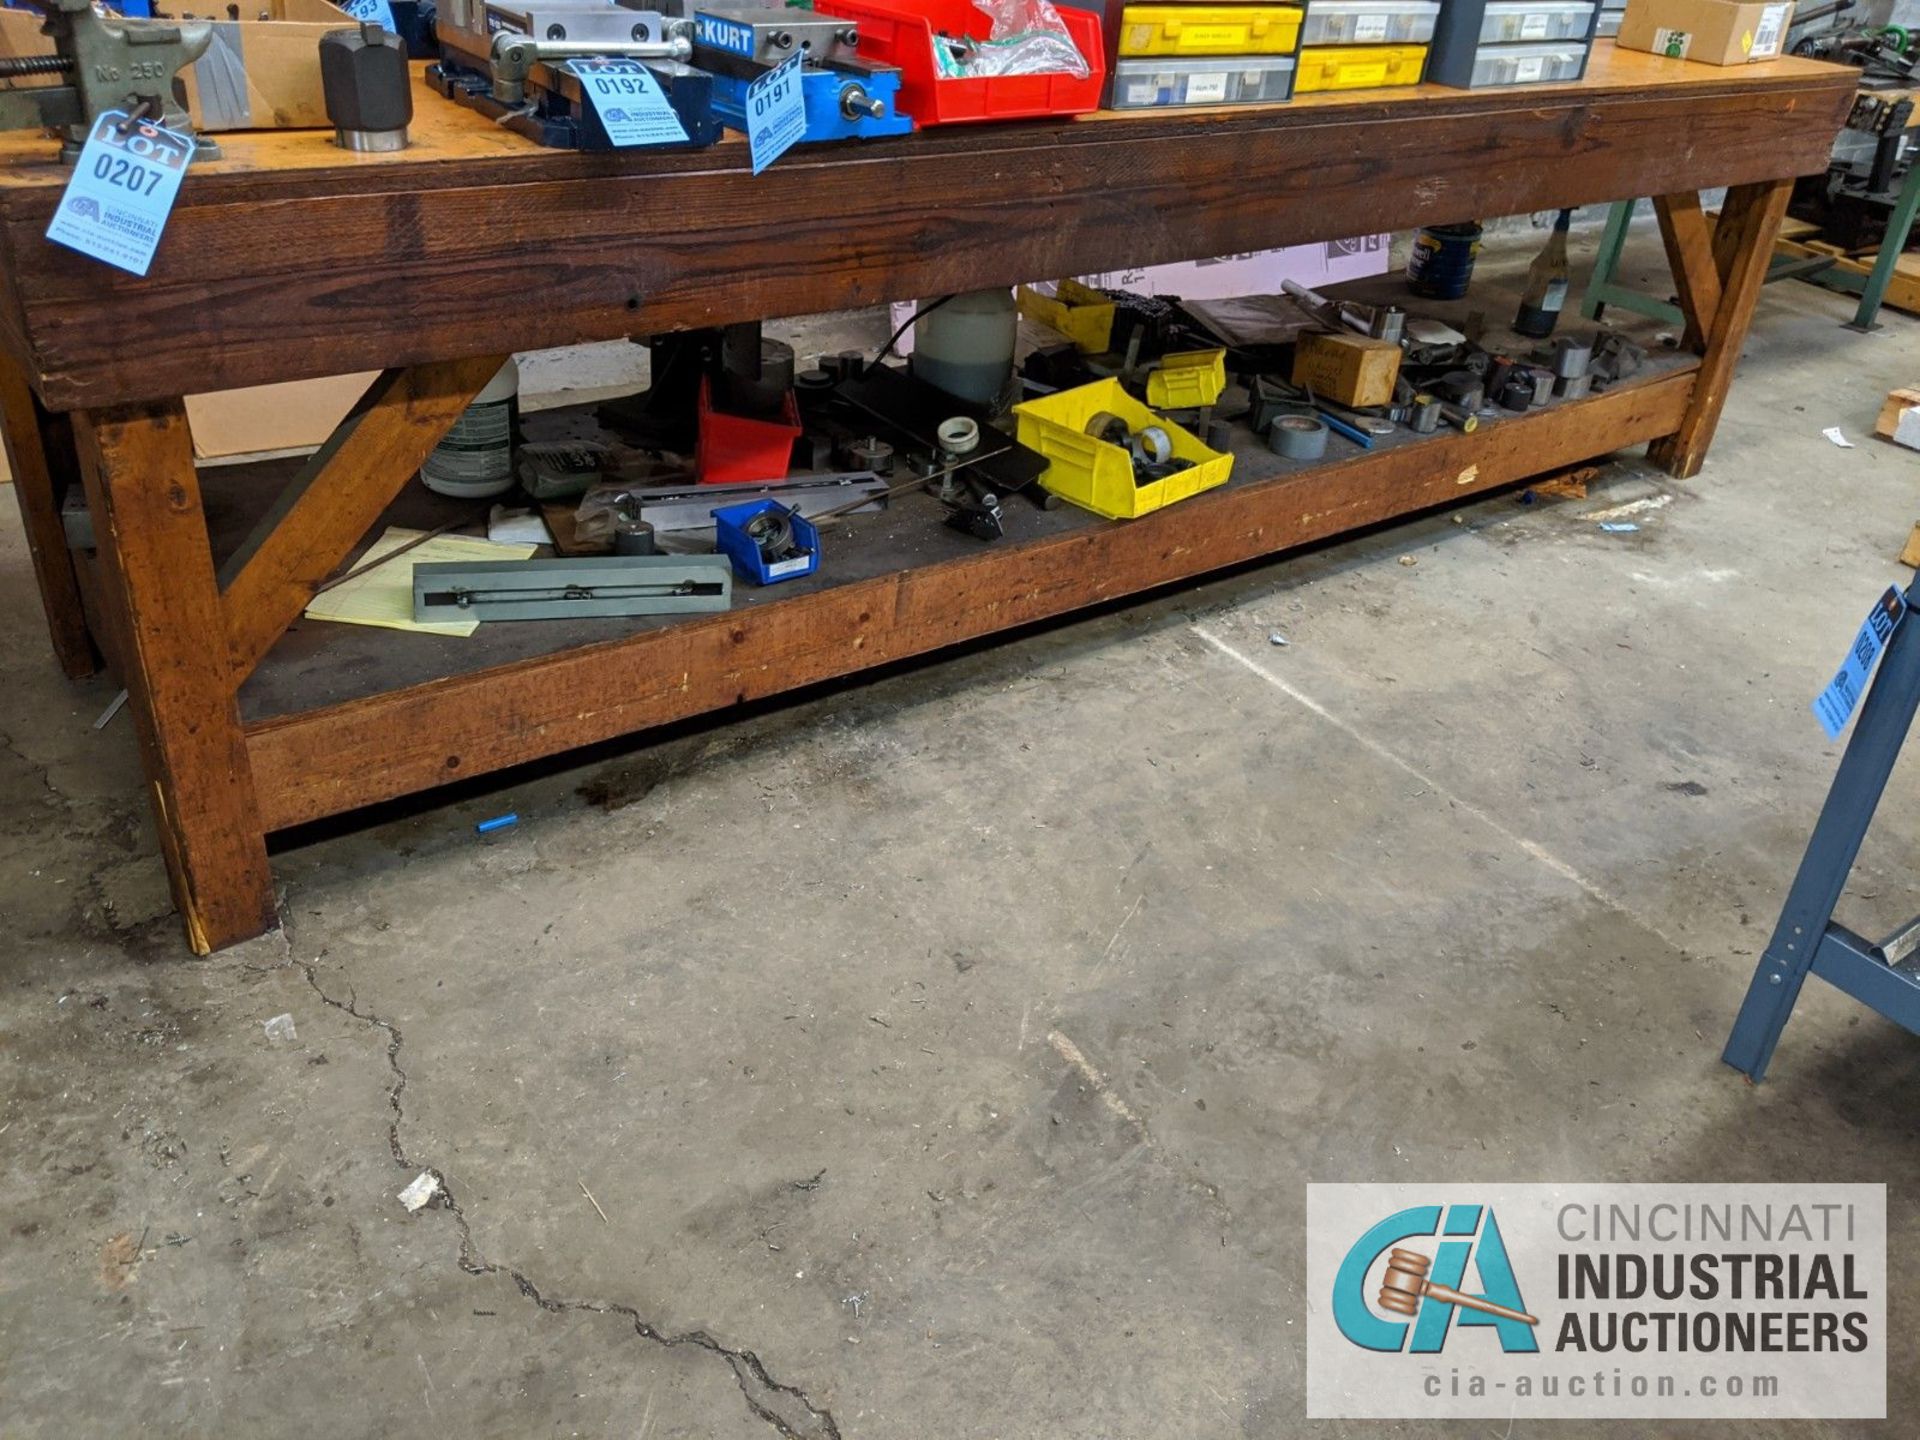 42" X 144" BENCH WITH VISE AND 40 TAPER TOOLS CHANGE FIXTURES AND WRENCHES